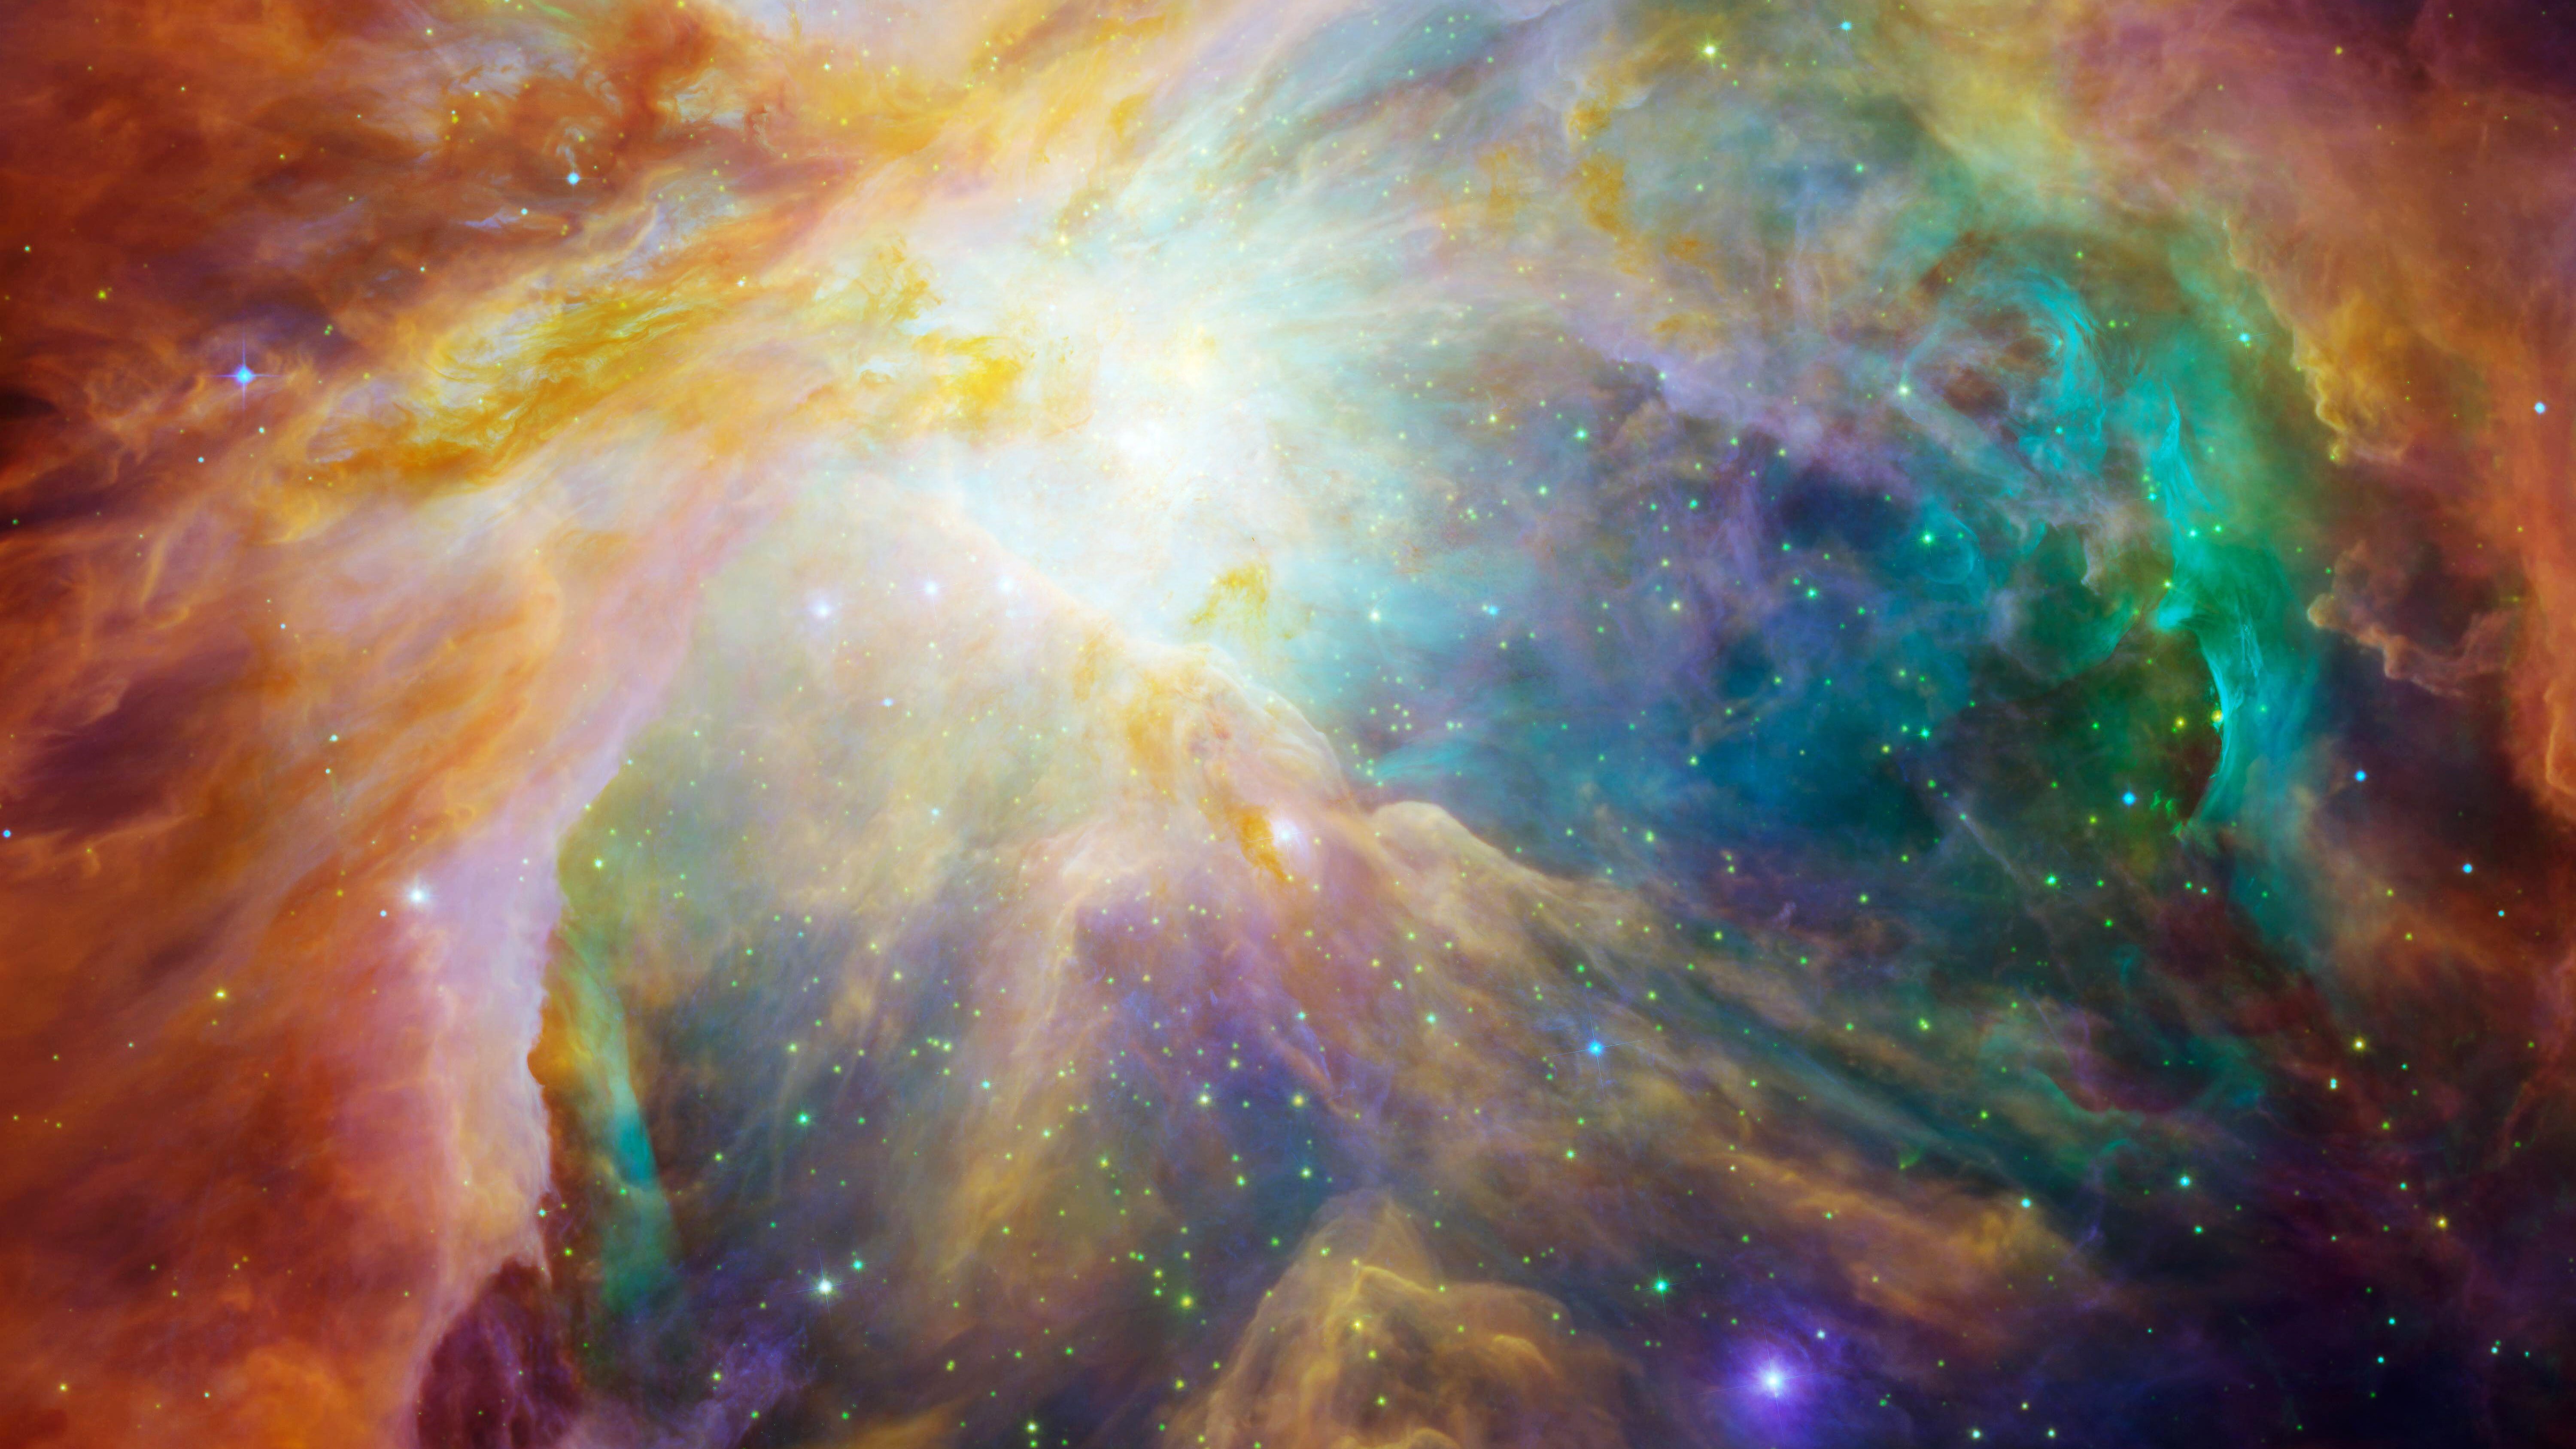 An image of the Orion Nebula showing a swirl of orange, green and purple..